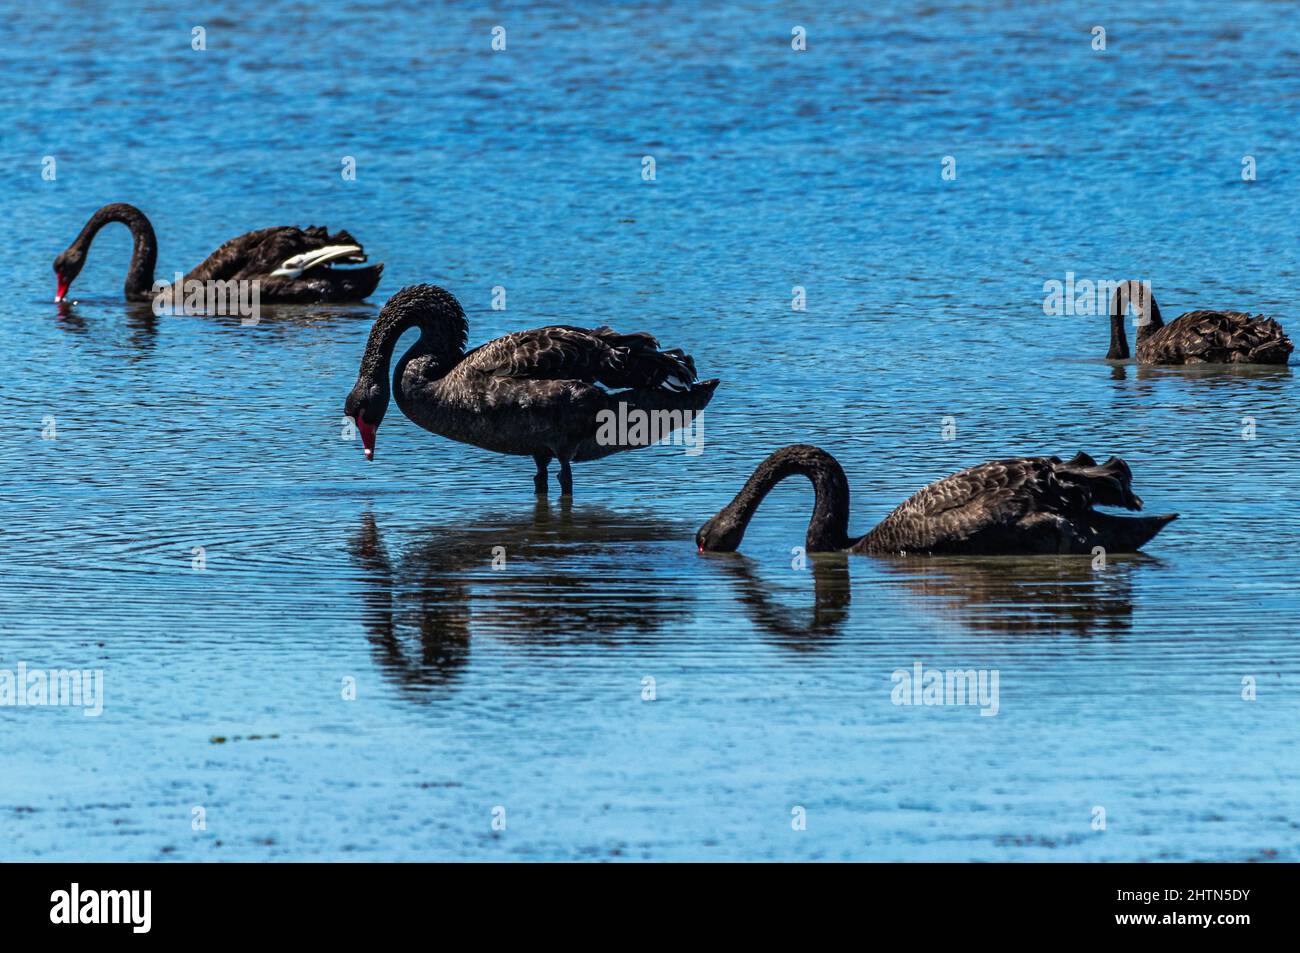 Black swans in shallow water Stock Photo